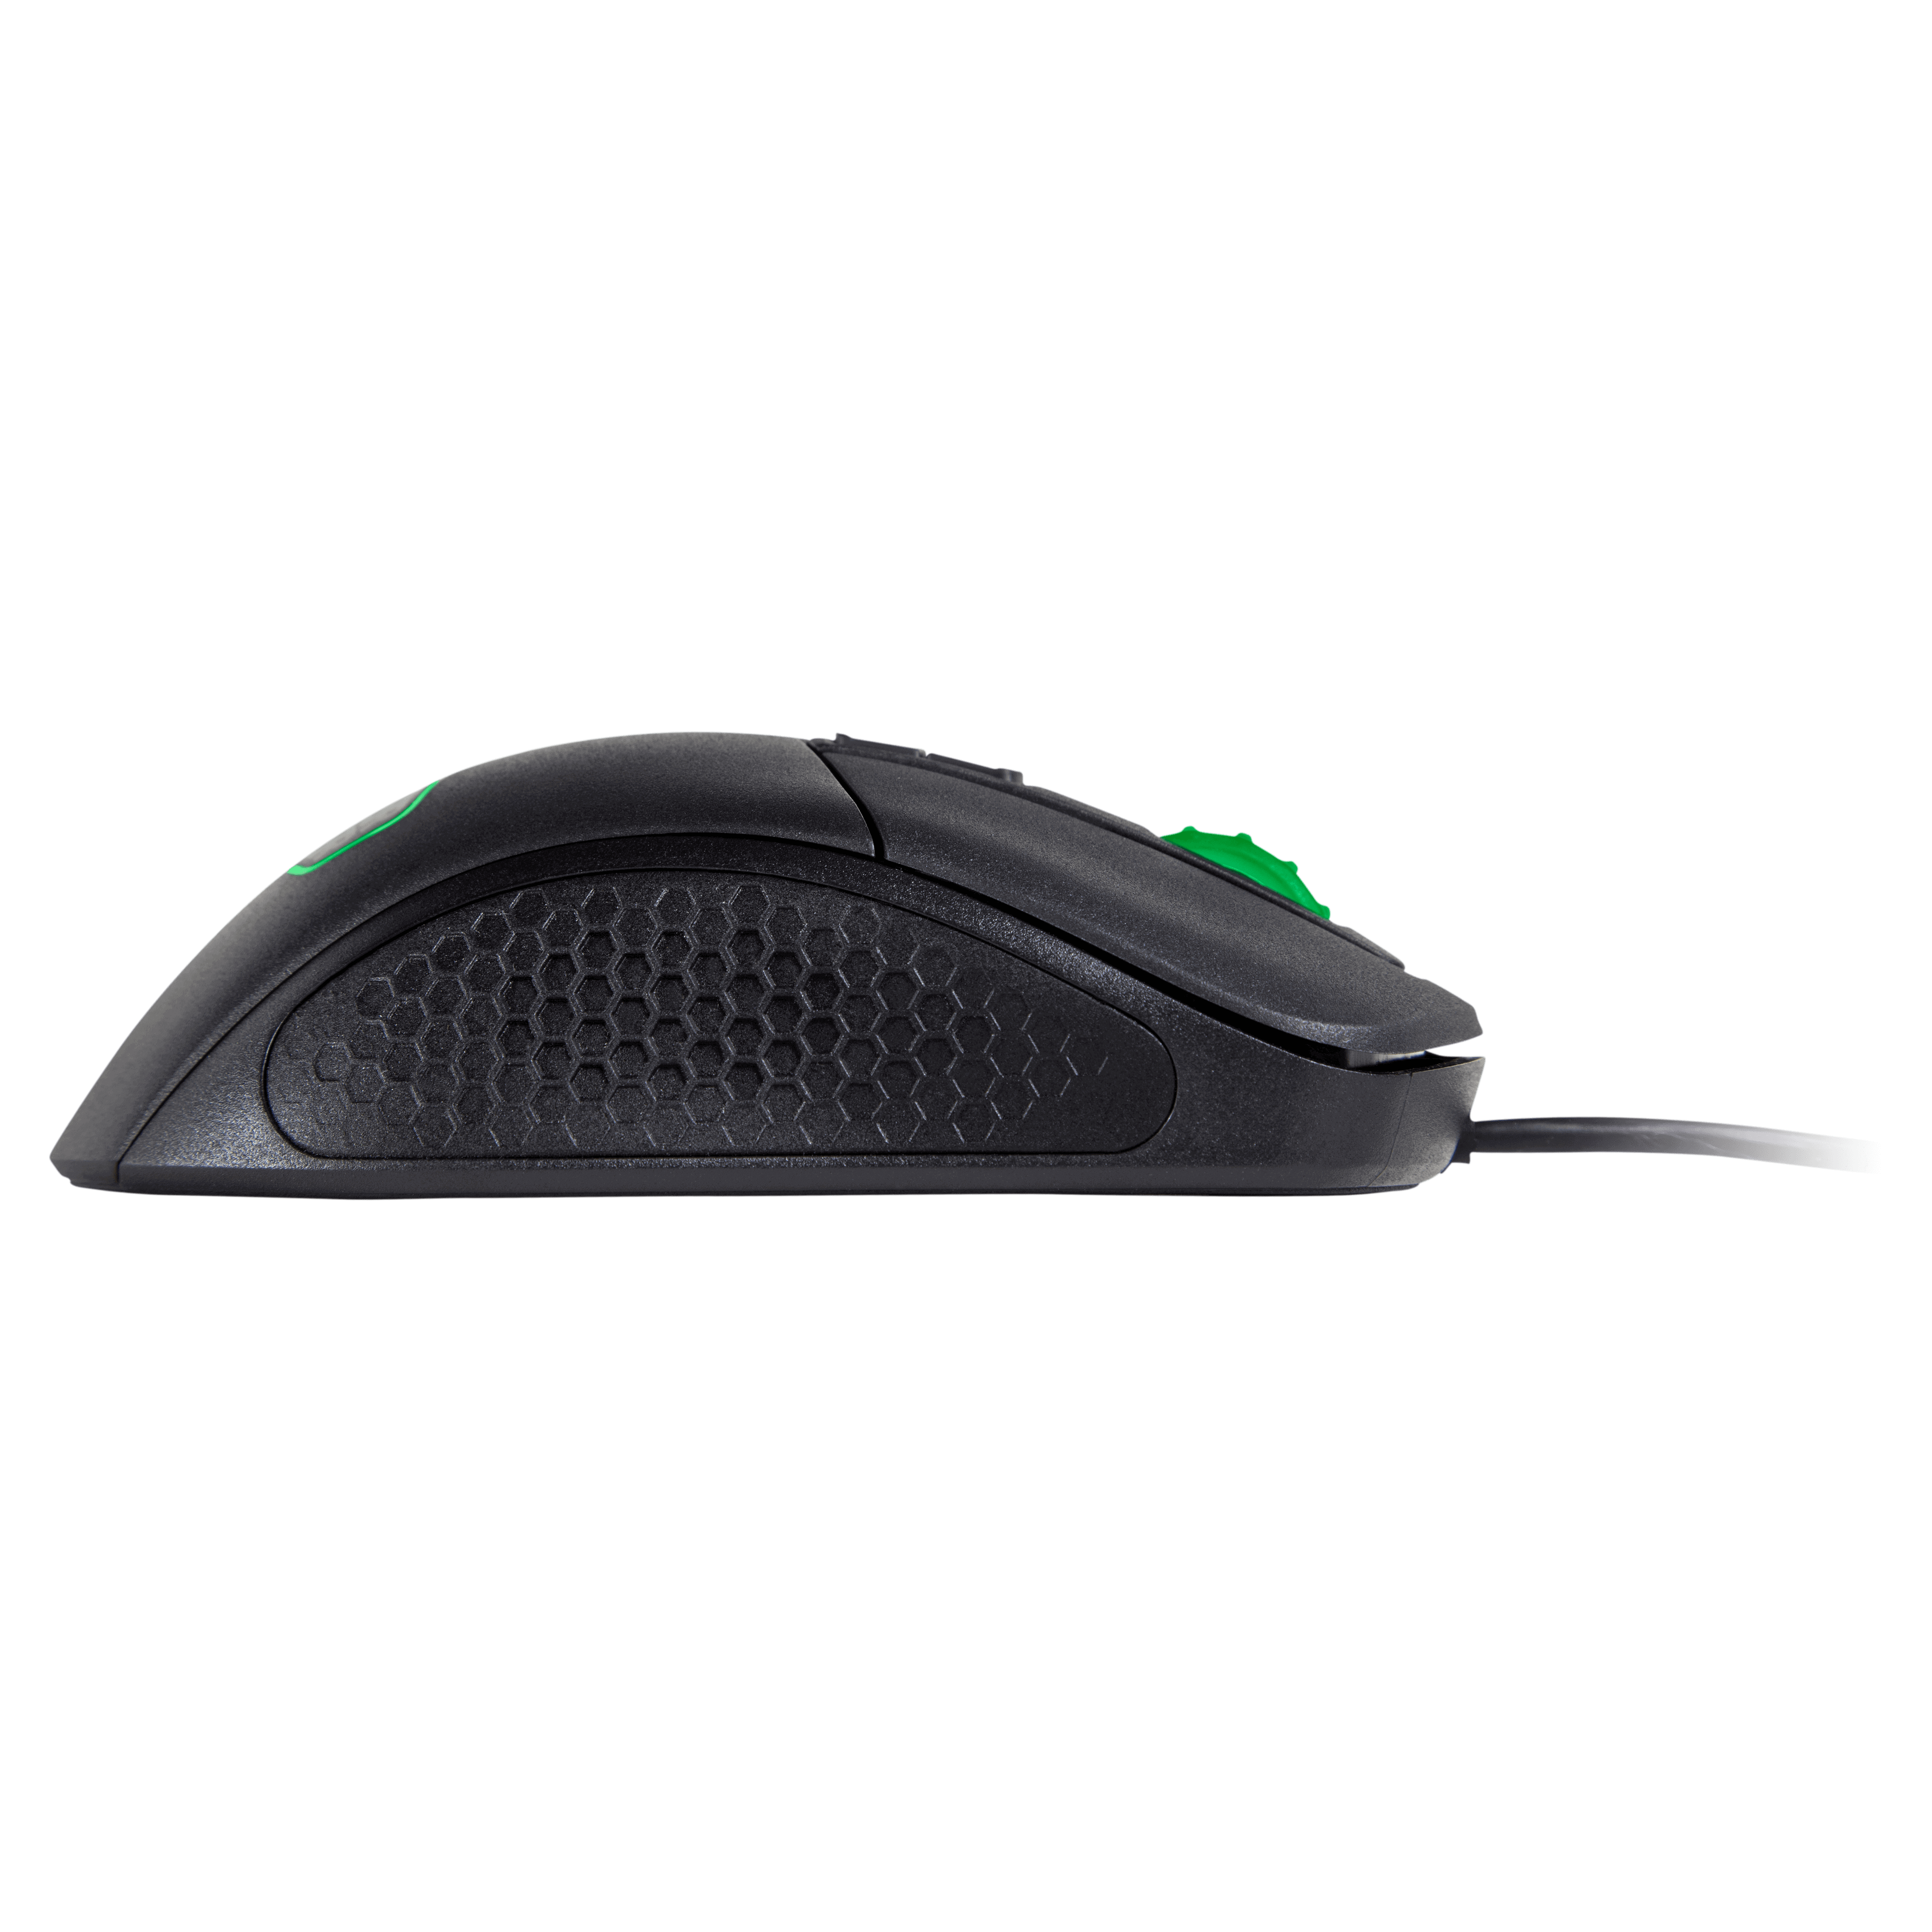 Souris Cooler Master MasterMouse MM530